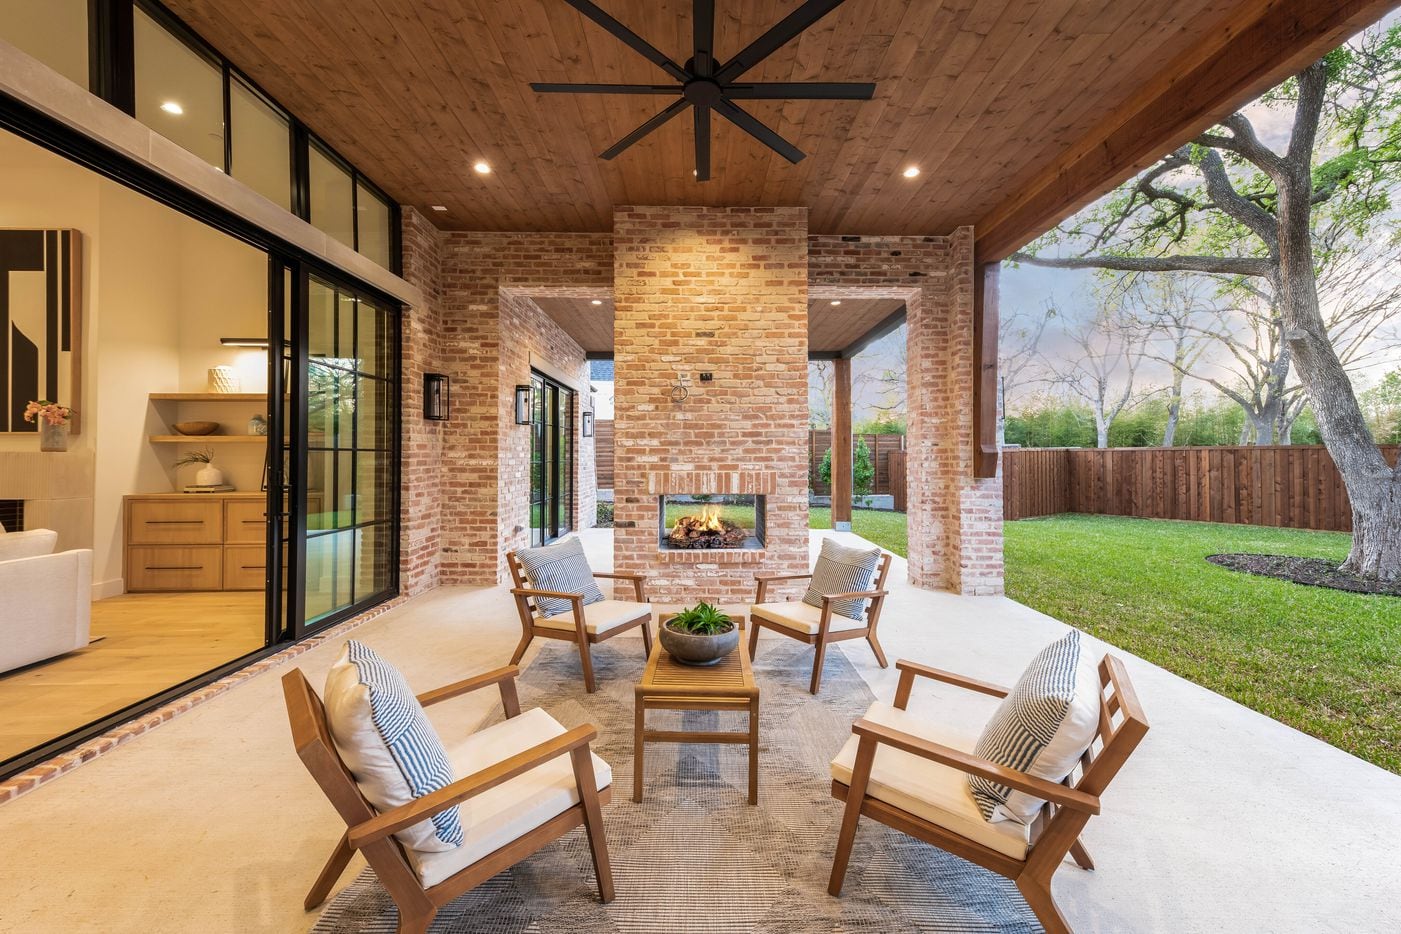 Take a look at the home at 7203 Brennans Drive in Dallas.